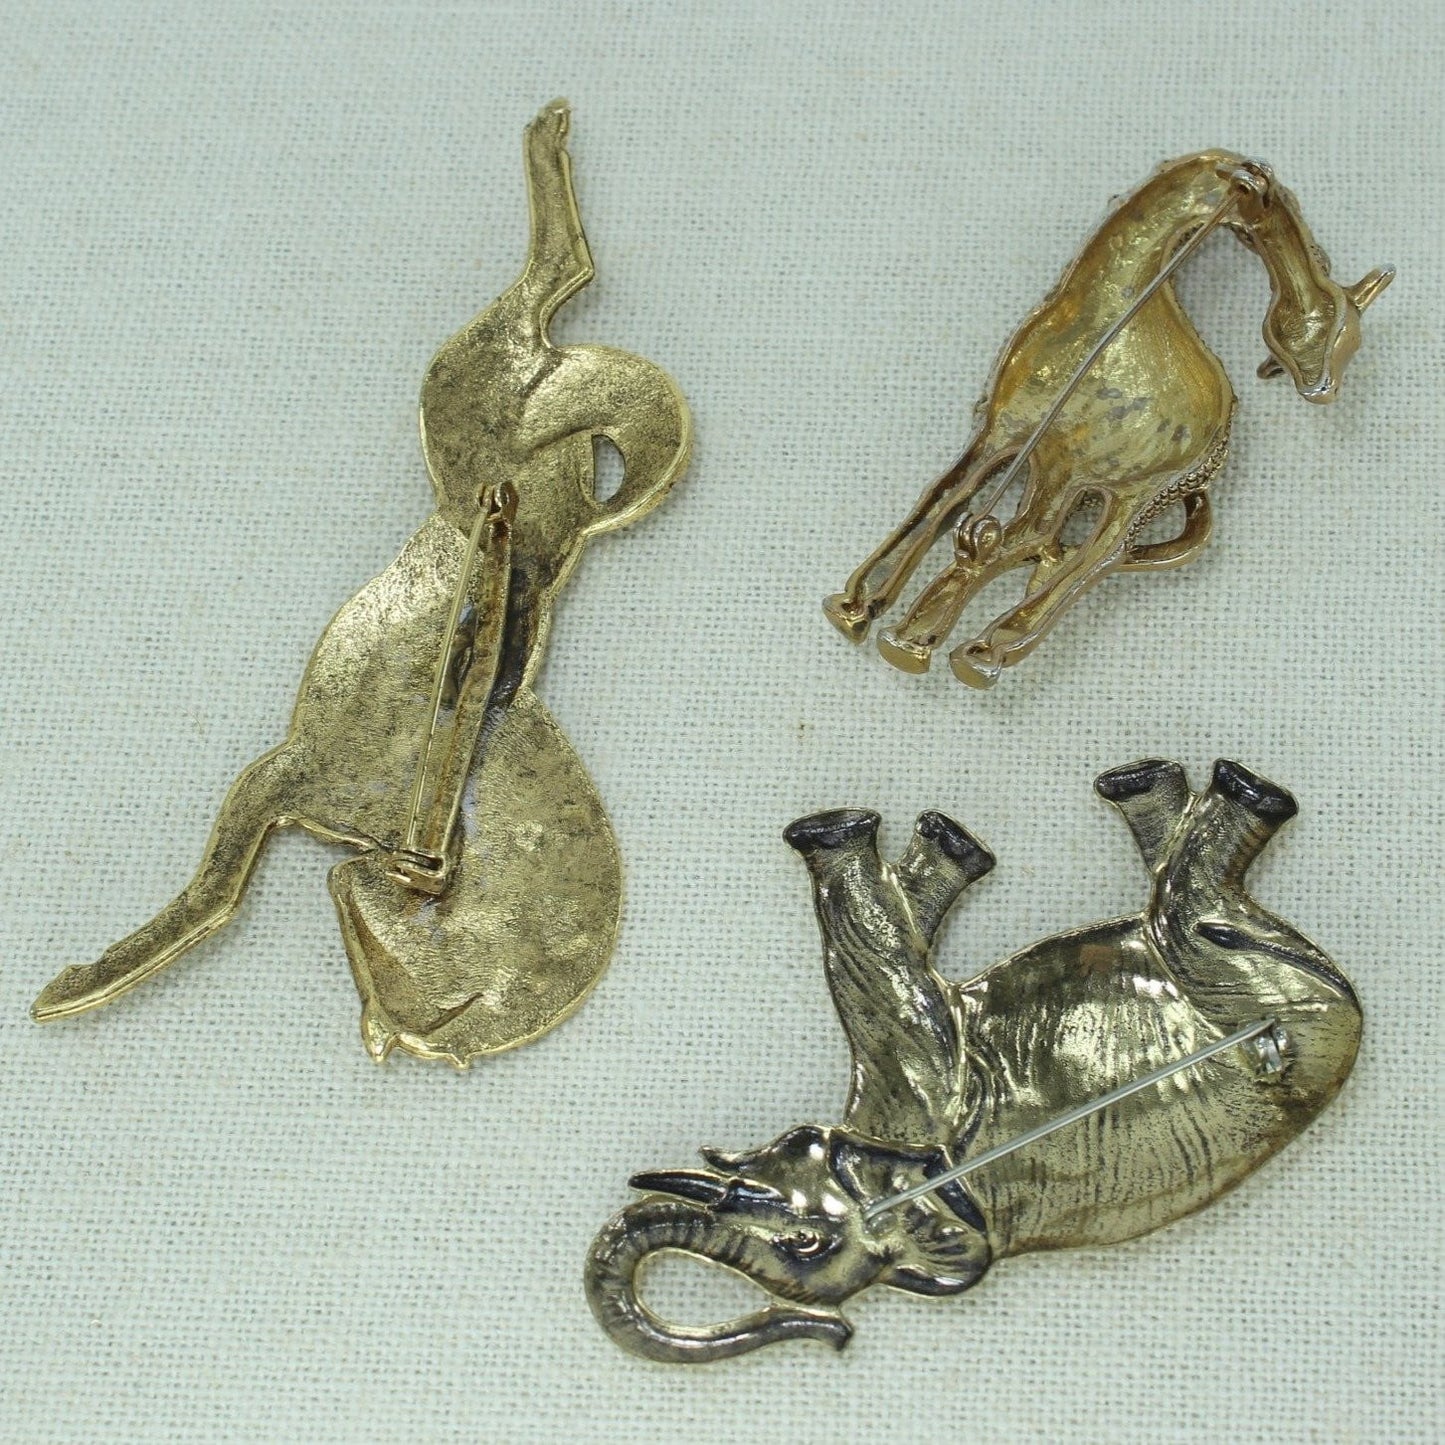 Animal Vintage Pins Lot 3 Unique Giraffe Stylized Horse Elephant  from Estates dimensional